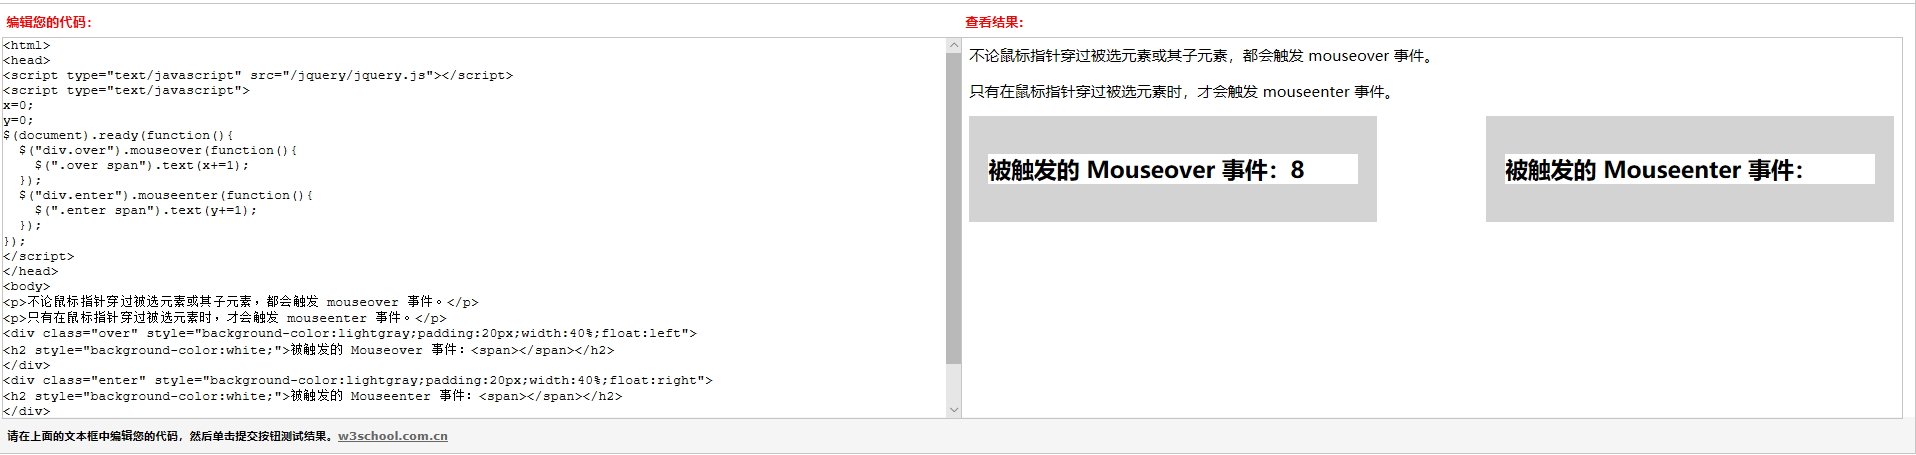 mouseover，mouseout与mouseenter，mouseleave